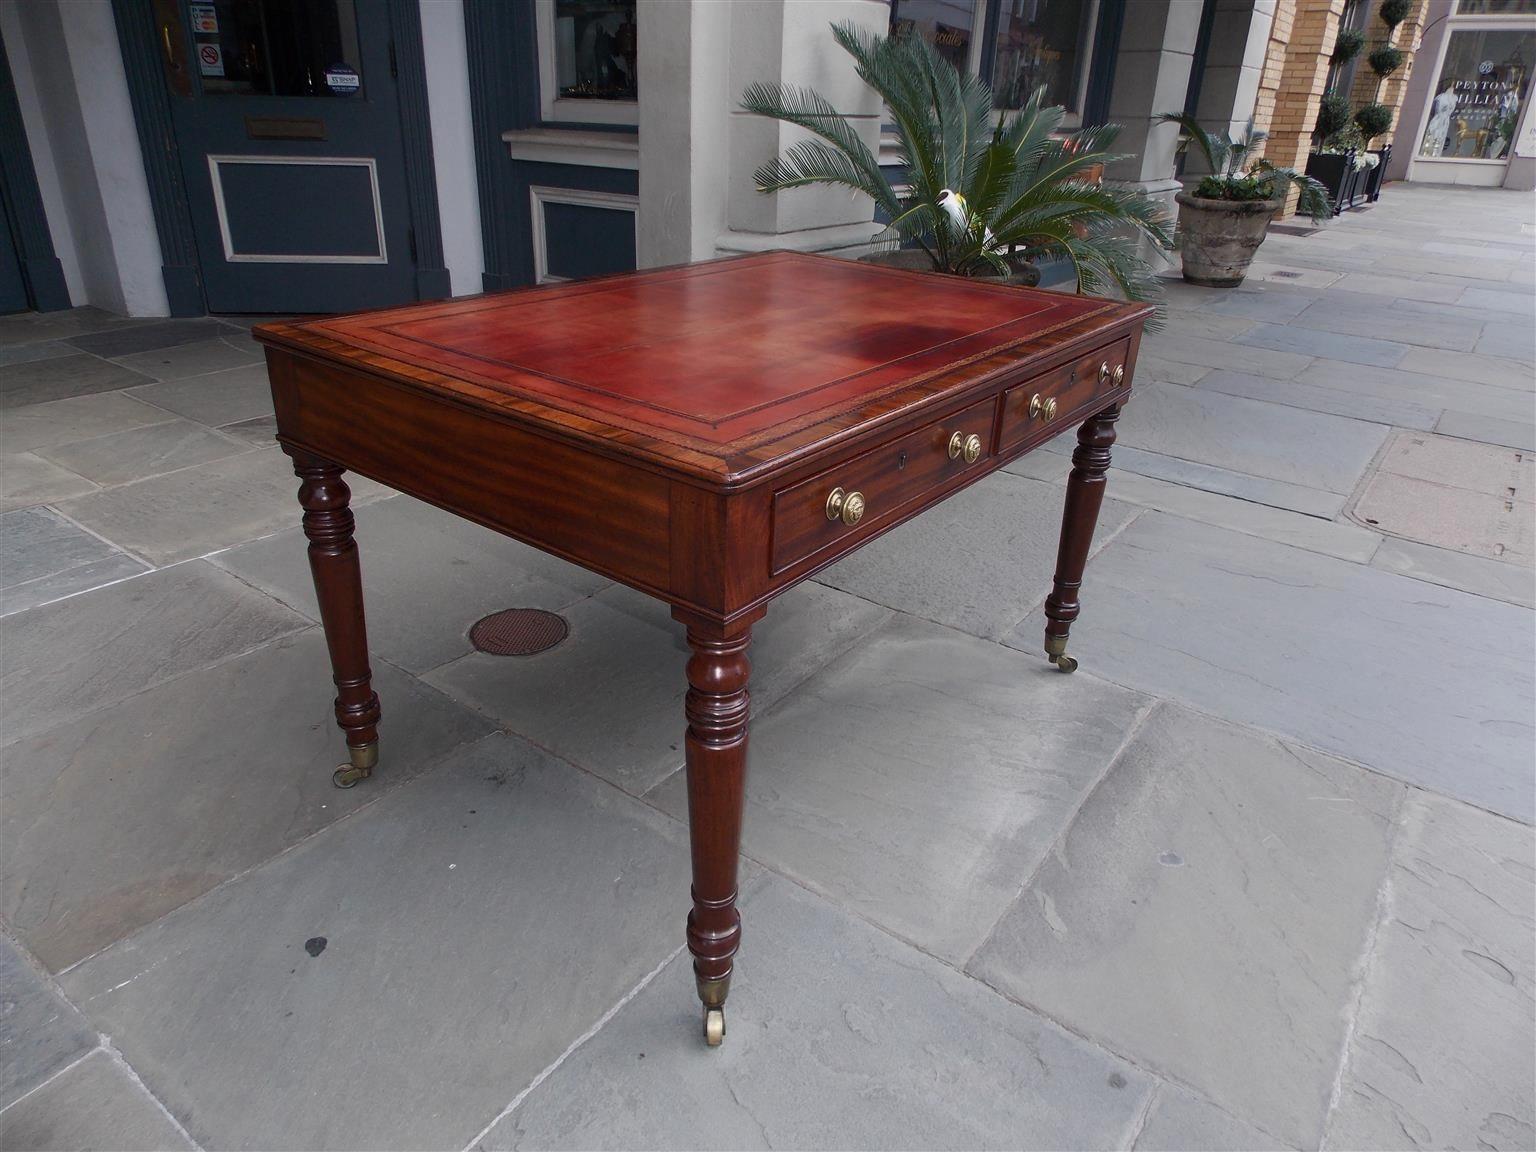 George III English Mahogany Leather Top Partners / Writing Desk with Orig, Casters, C. 1810